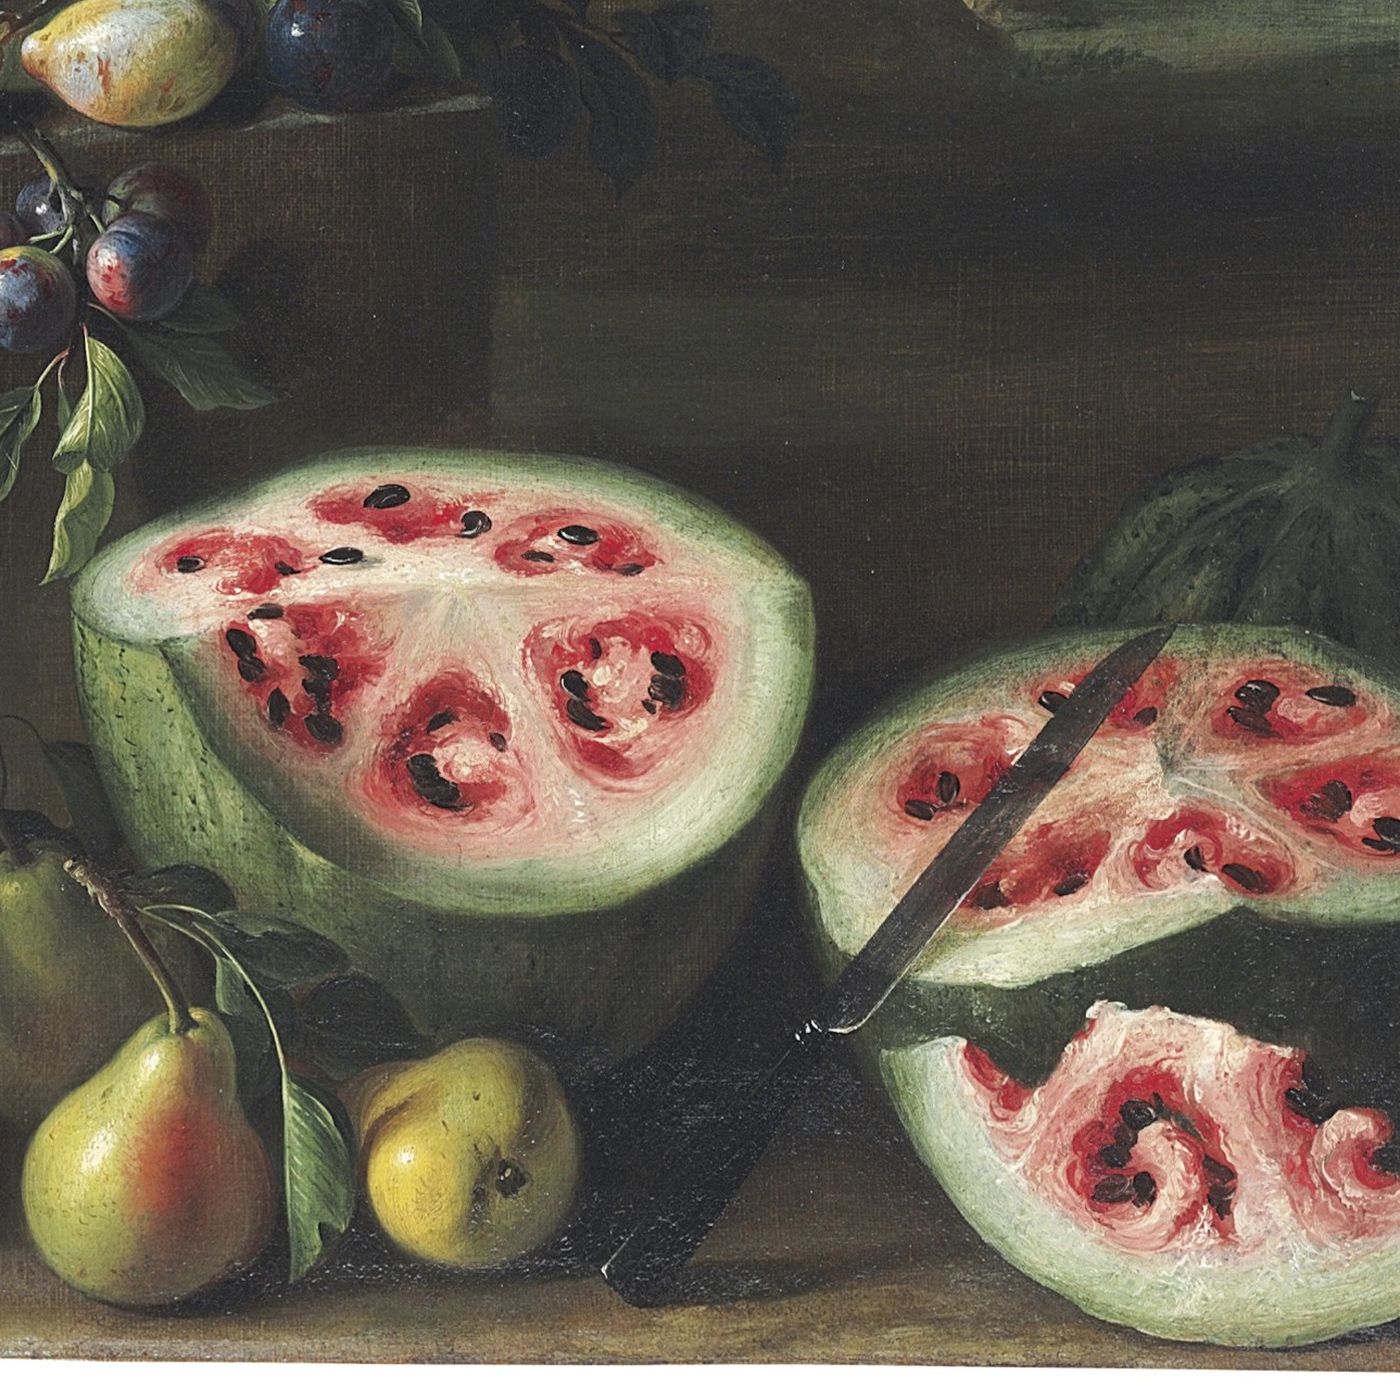 A Renaissance painting reveals how breeding changed watermelons - Vox